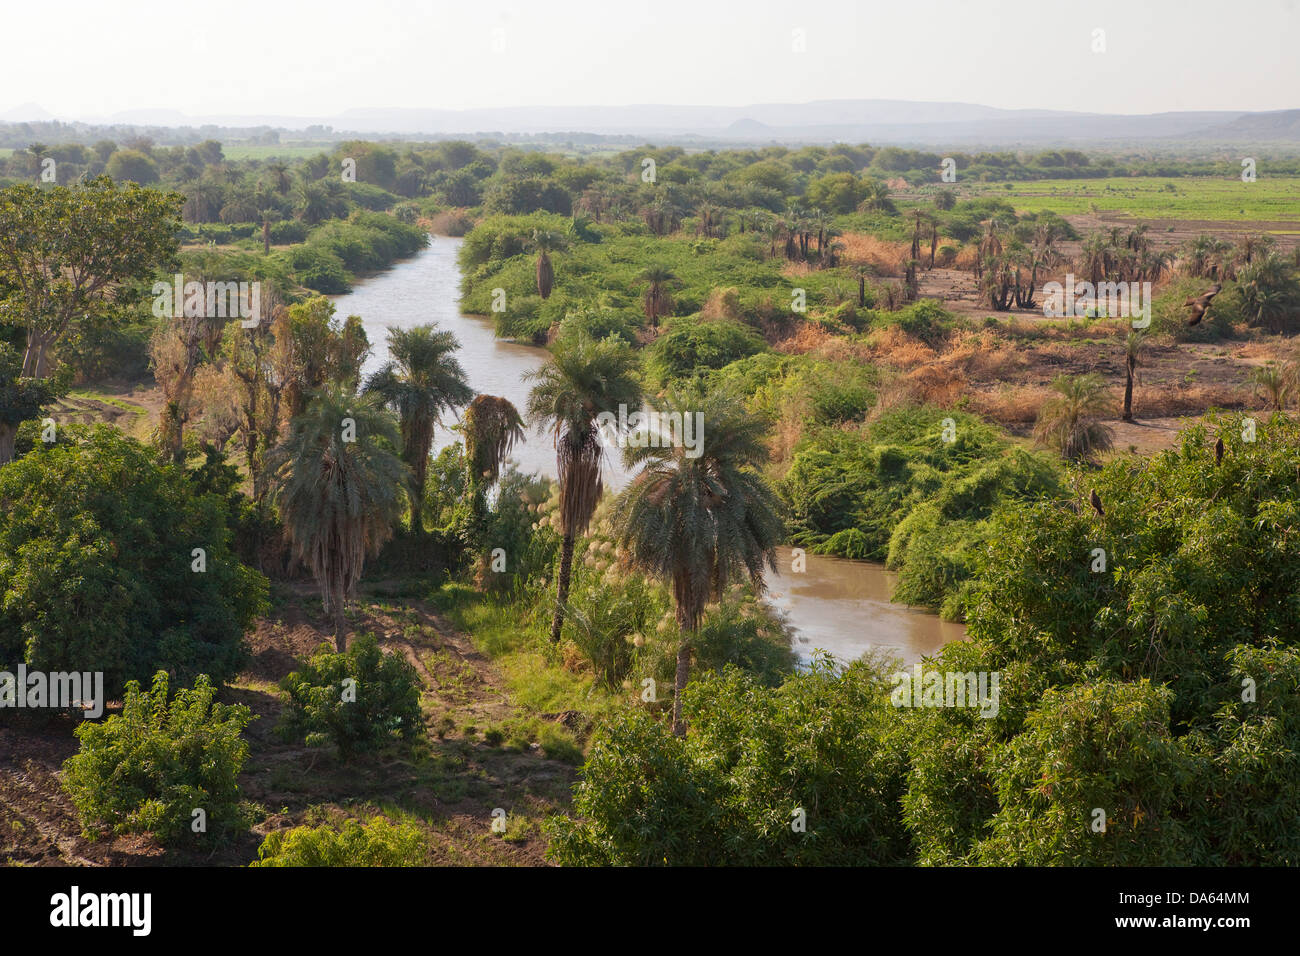 Fertile, agriculture, Afar, Asaita, Africa, town, city, river, flow, brook, body of water, water, agriculture, Ethiopia, Stock Photo